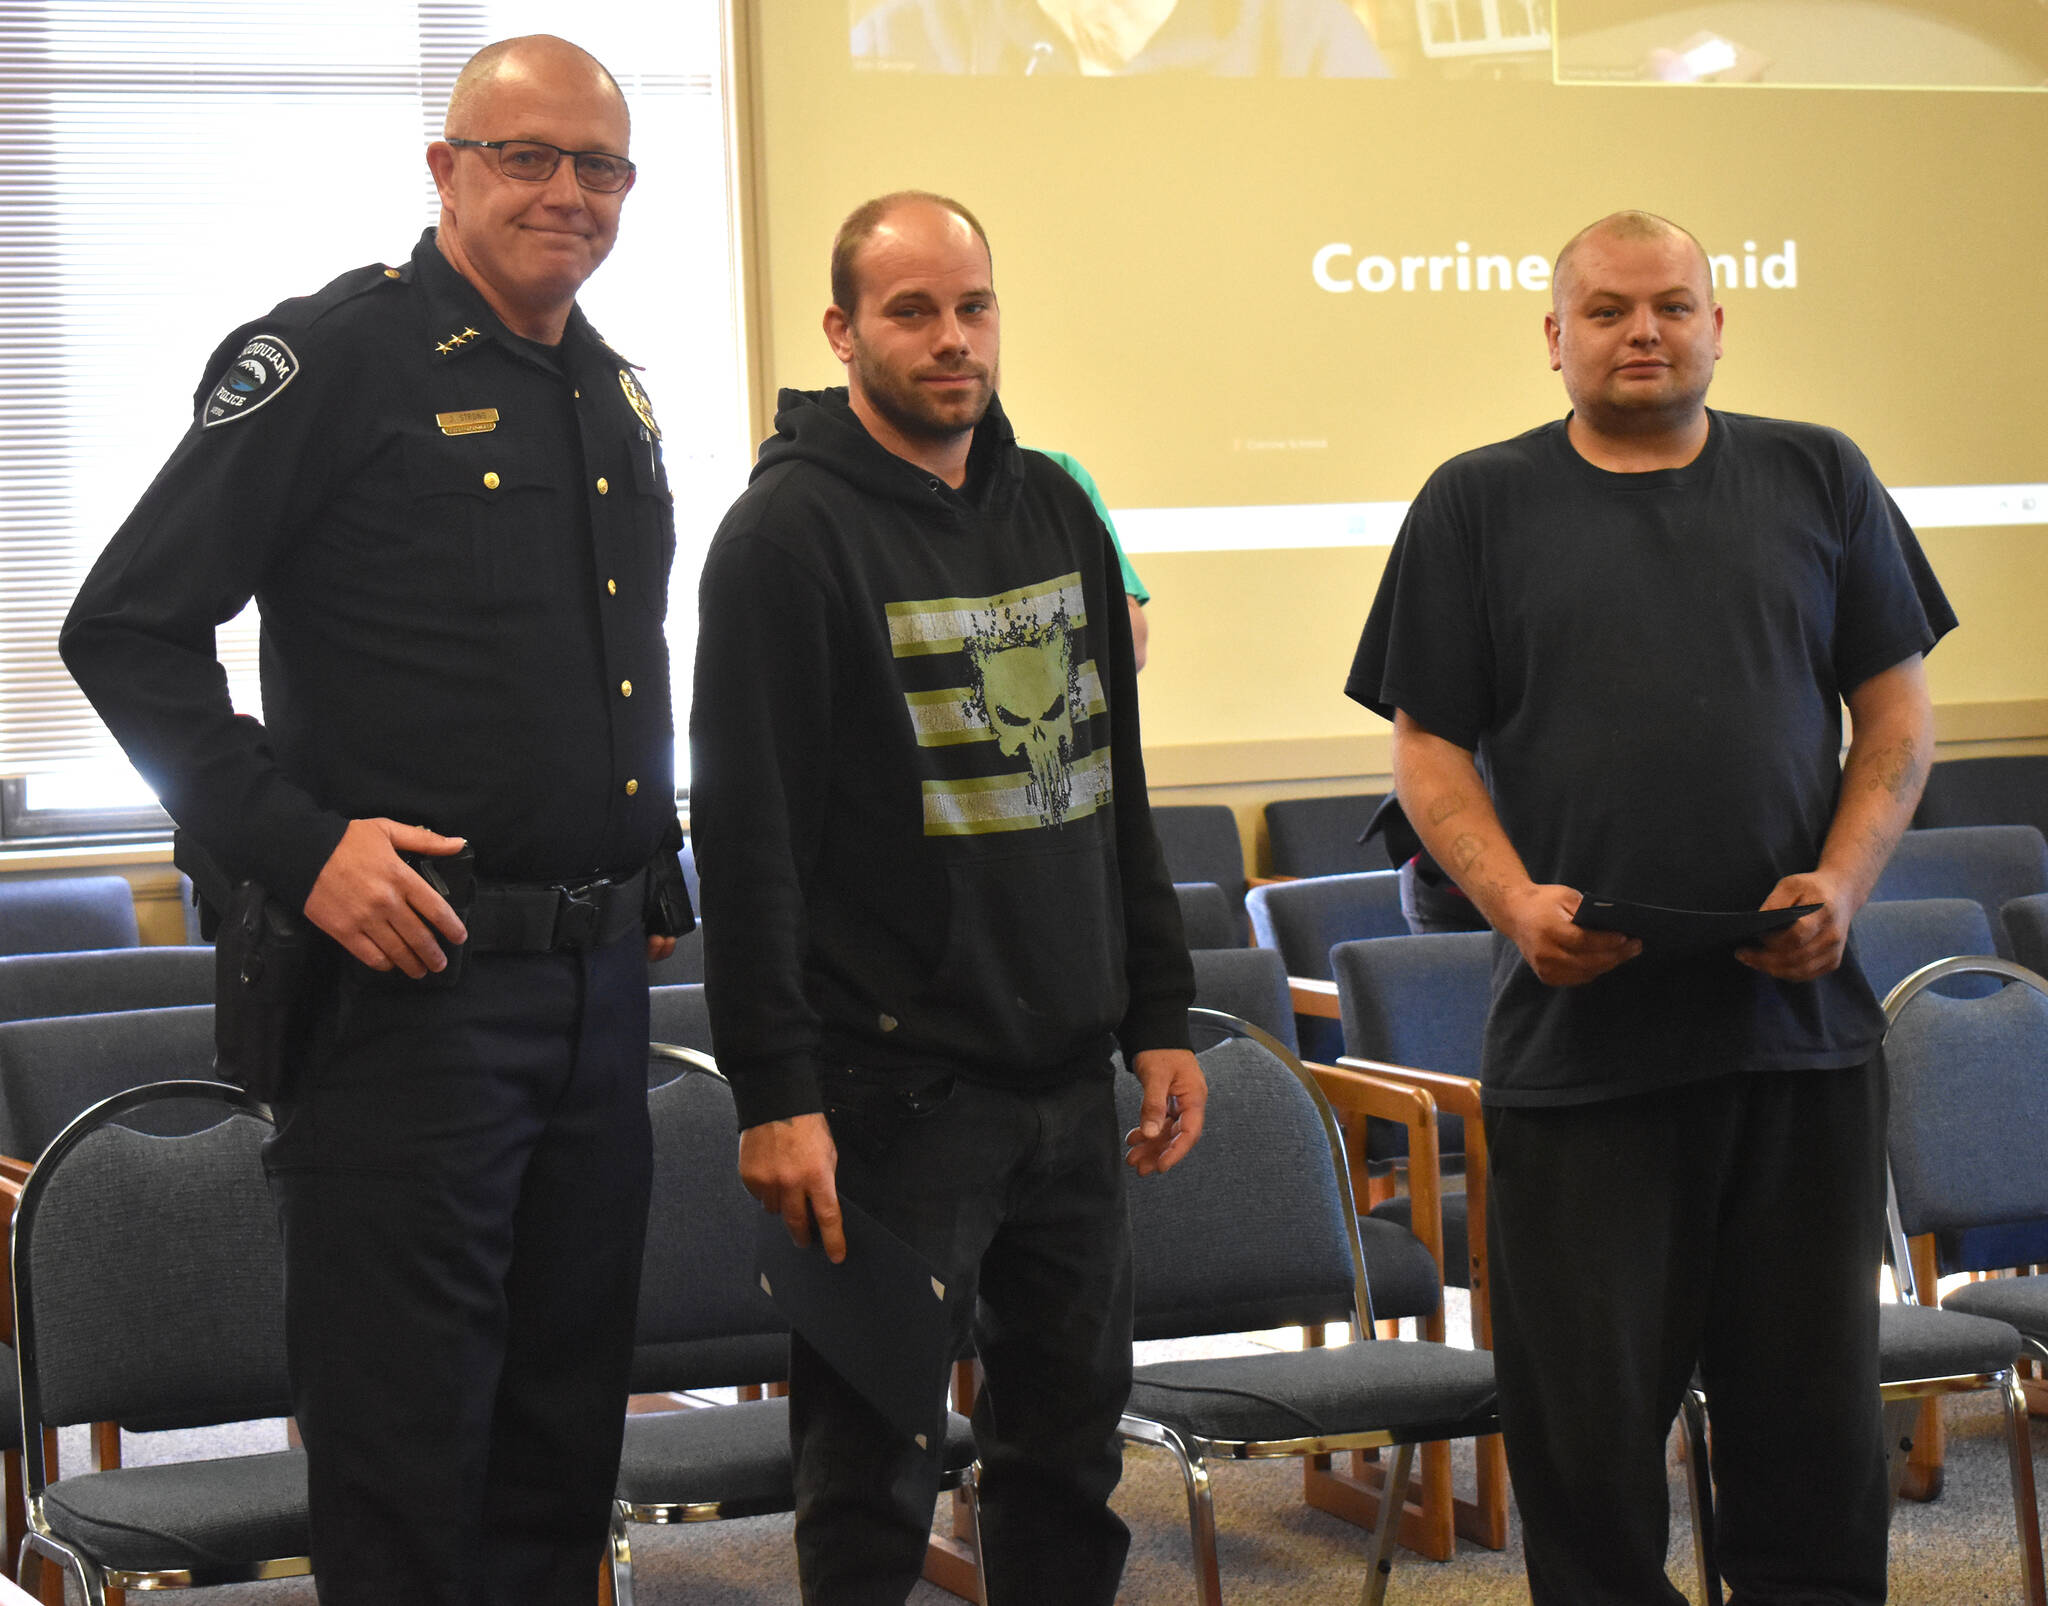 Matthew N. Wells / The Daily World
Hoquiam Police Chief Joe Strong, from left, stands with Jeffrey Alderton II and Robert Olson, whose quick thinking and decisive action helped law enforcement across Grays Harbor County rescue two children who were in a stolen minivan on May 15 in South Aberdeen.